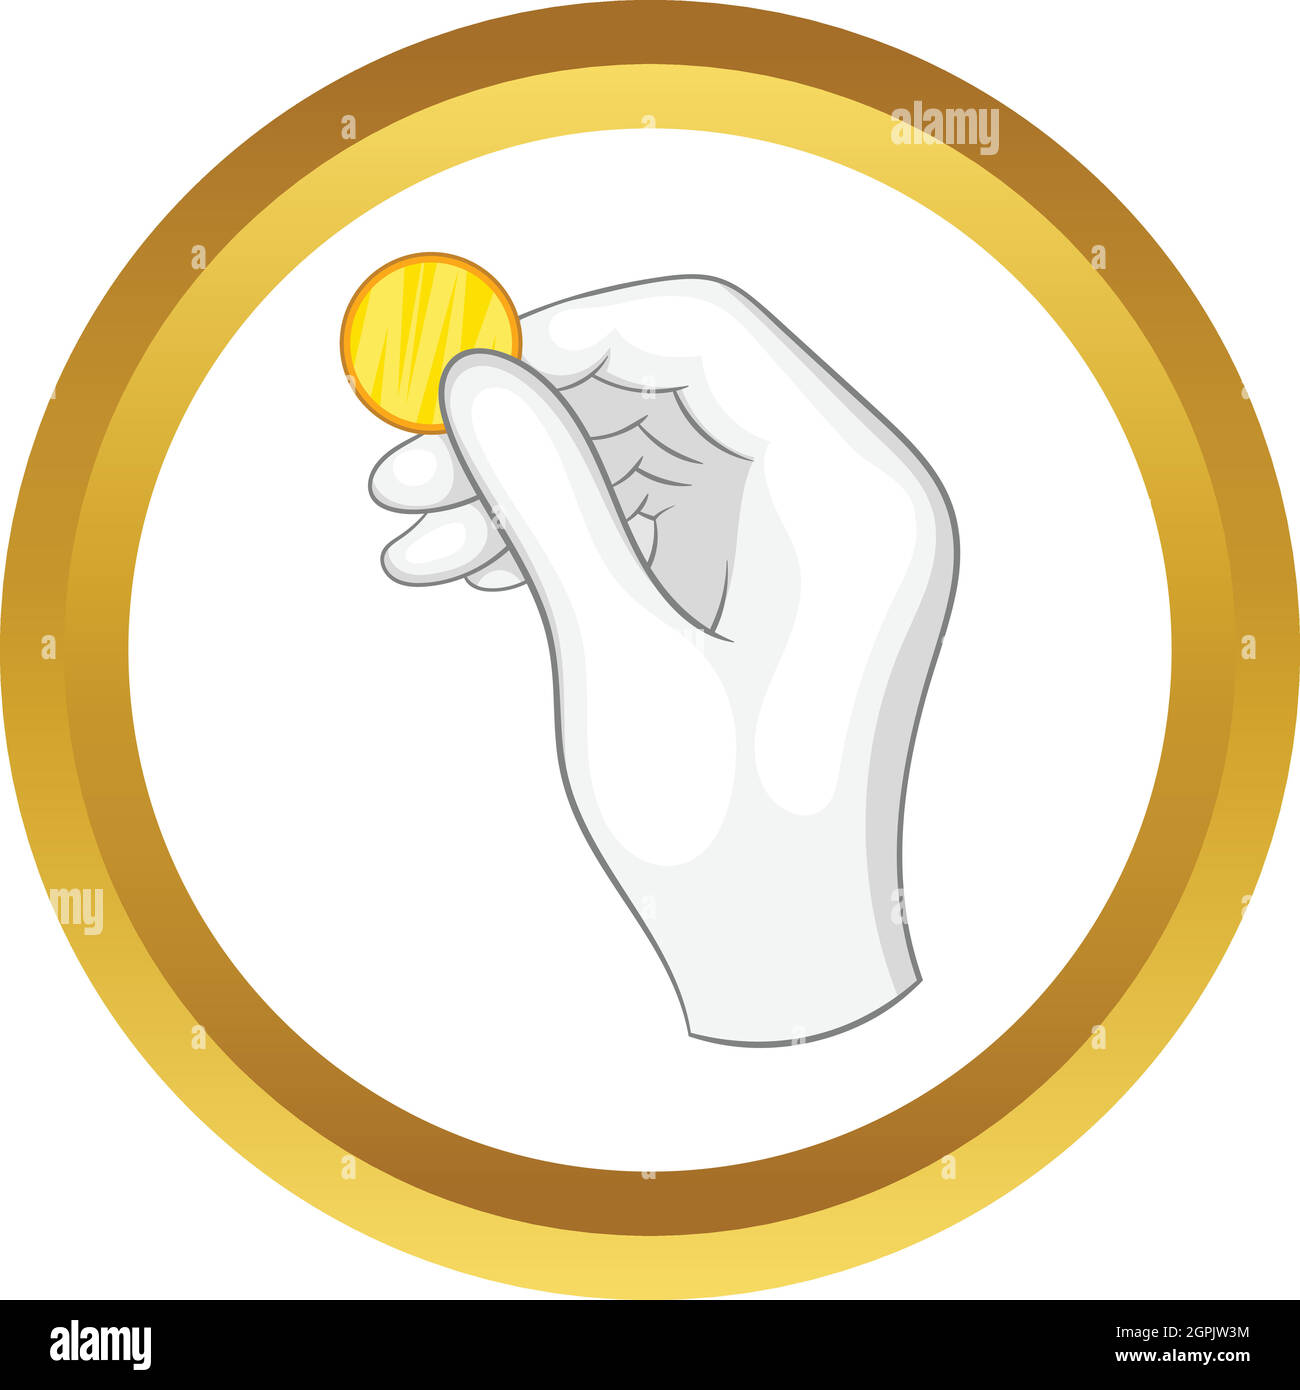 Hand in a white glove holding a coin vector icon Stock Vector